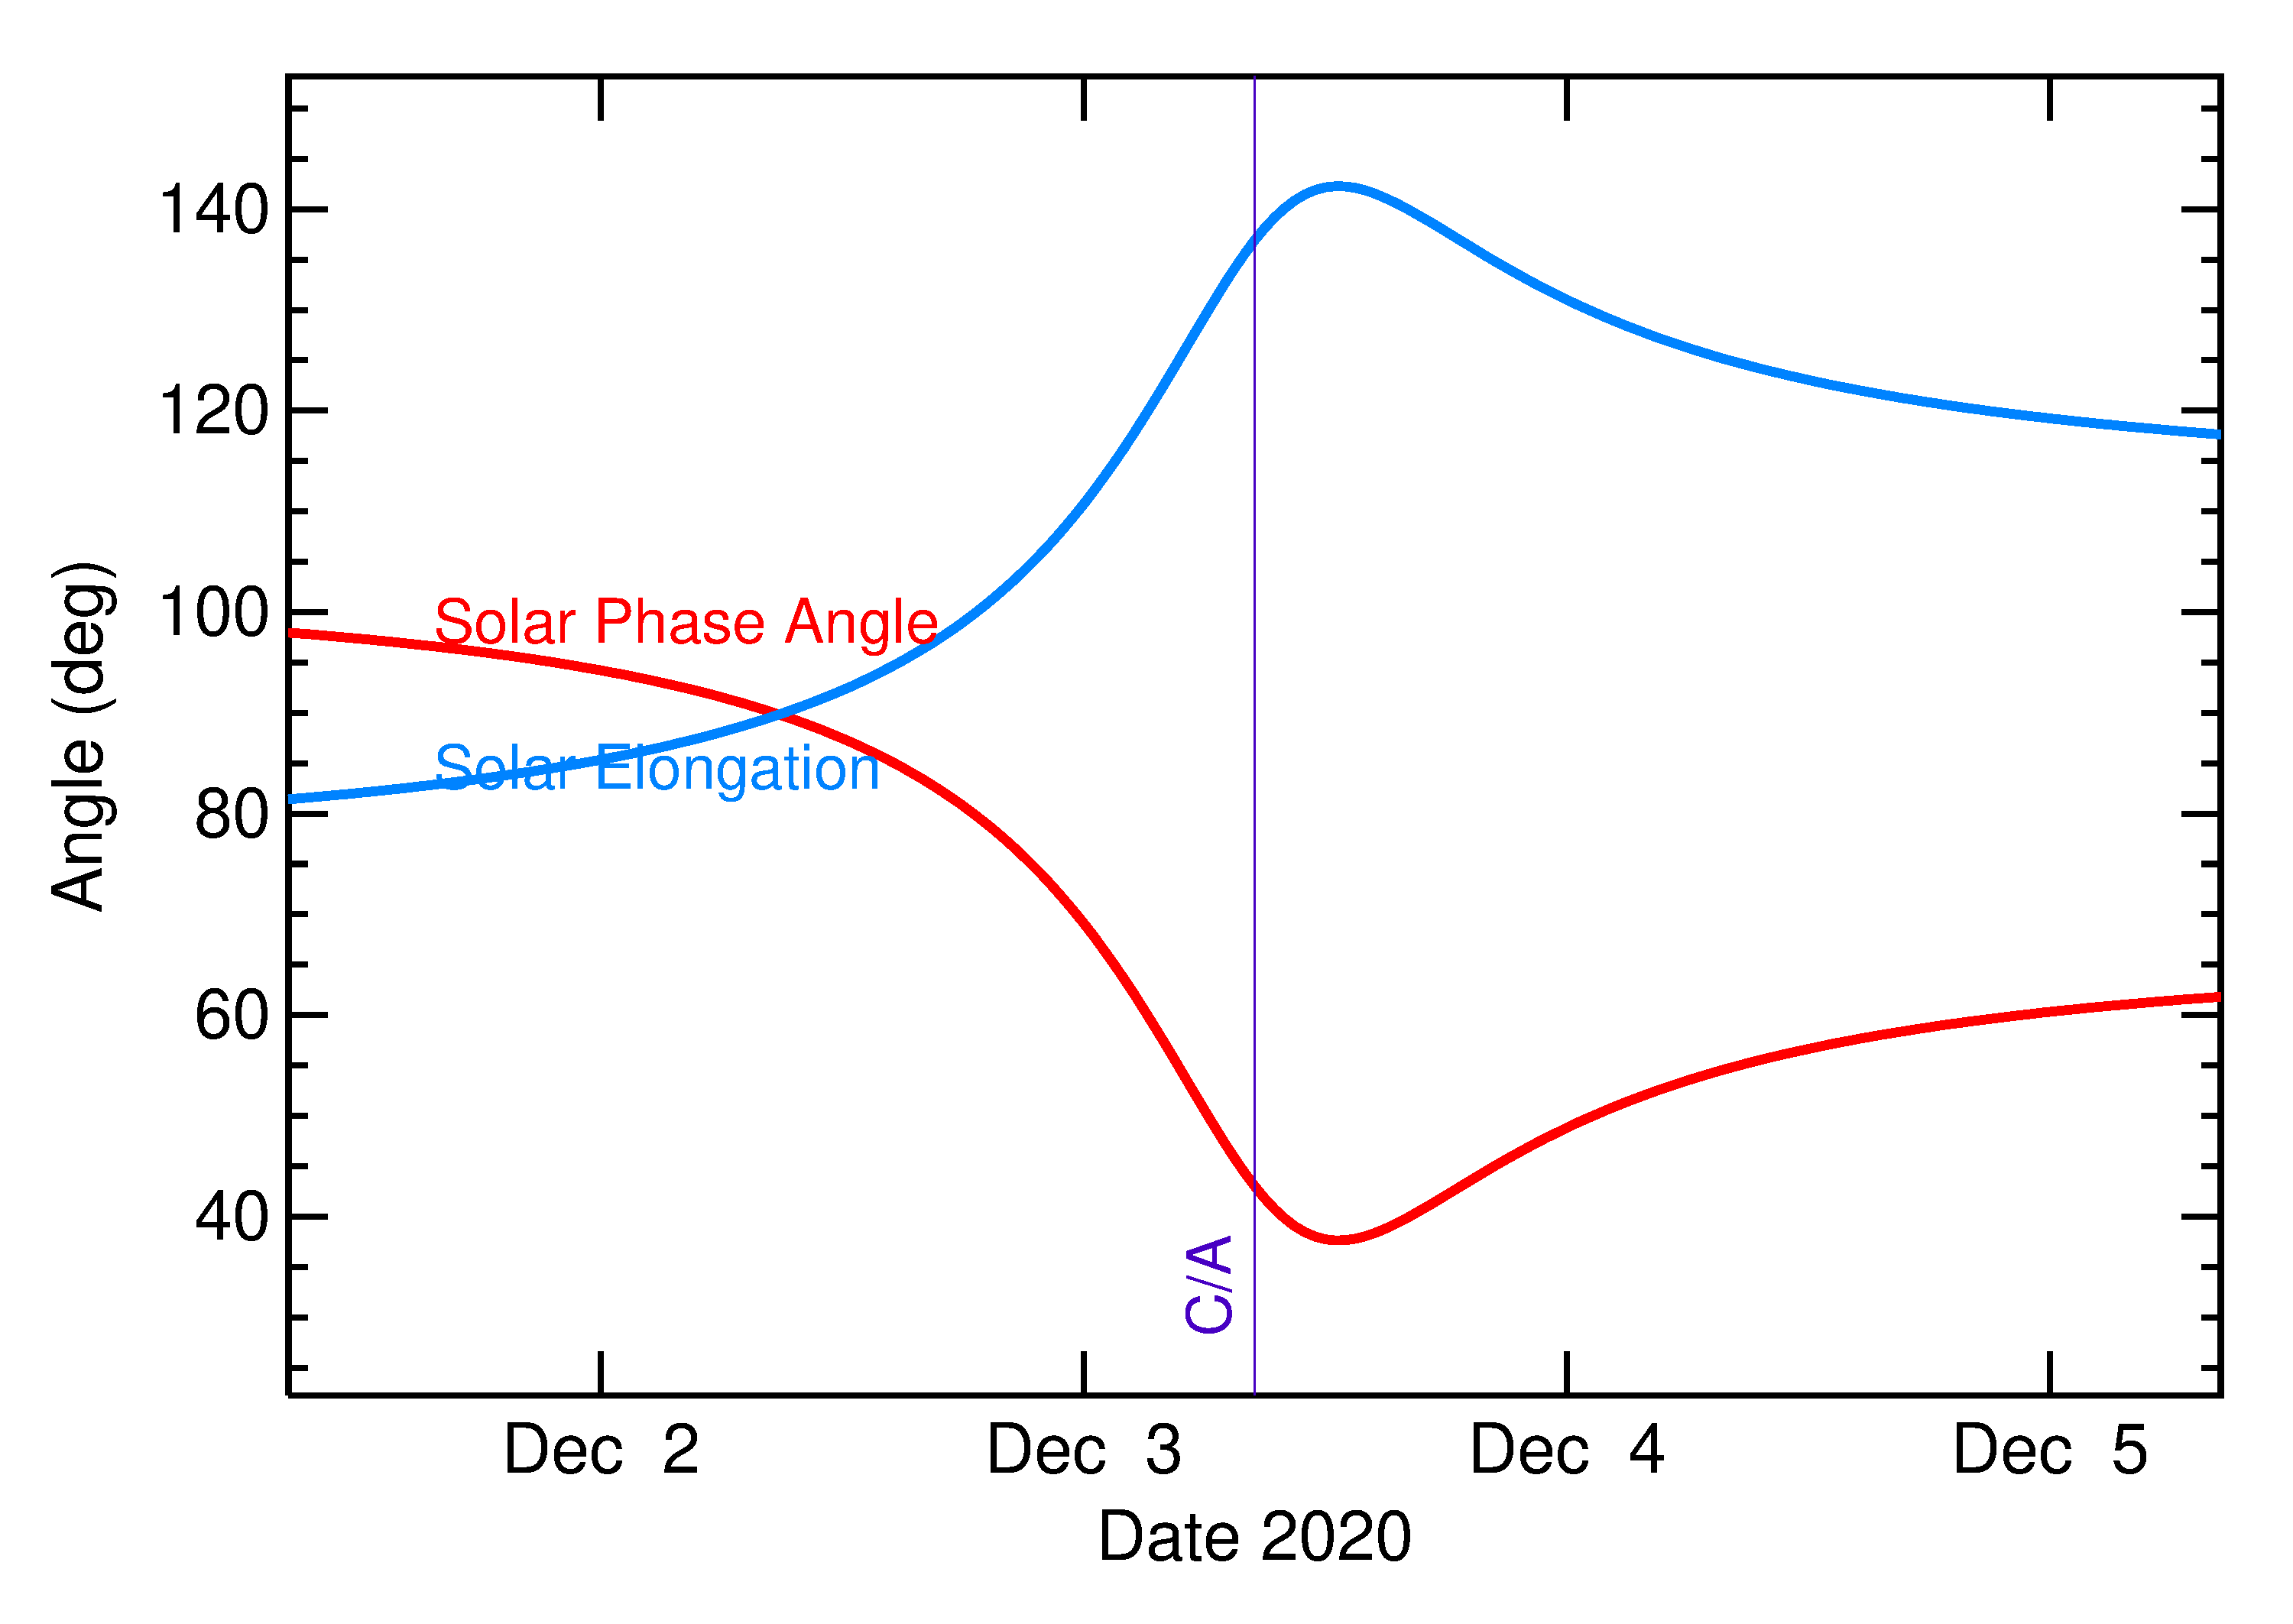 Solar Elongation and Solar Phase Angle of 2020 XE1 in the days around closest approach